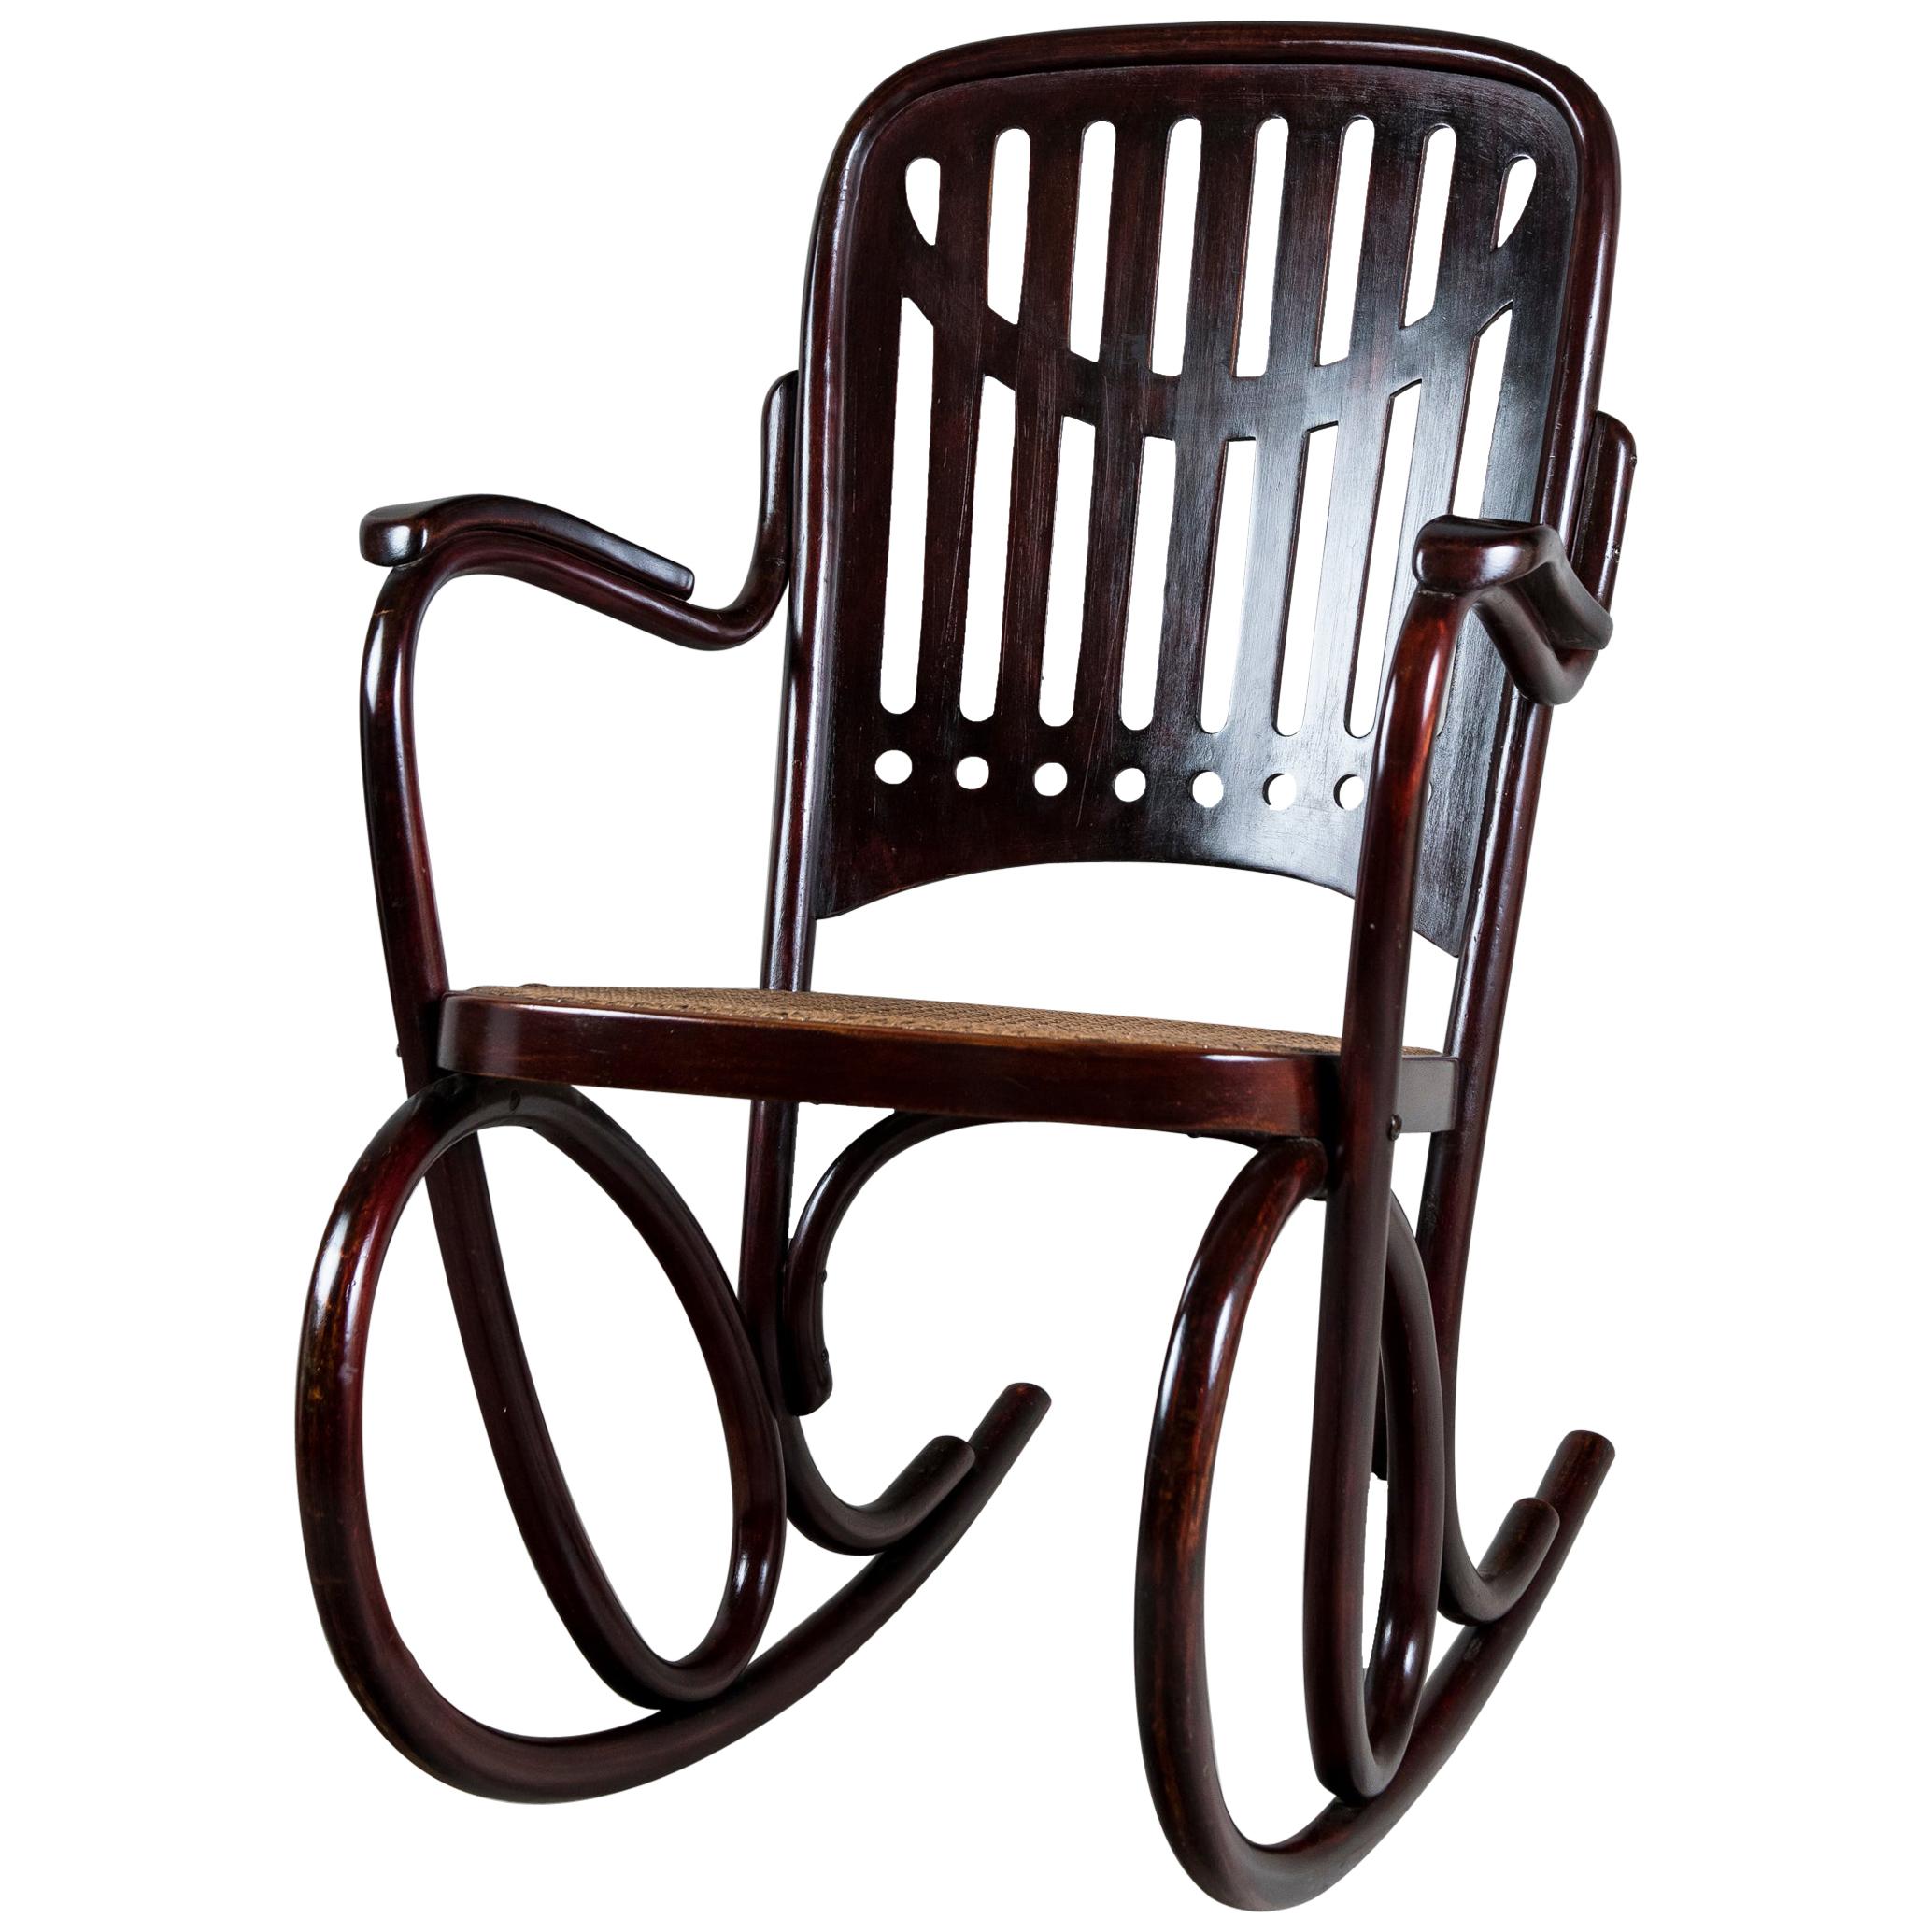 Thonet Rocking Chair, Model Number 71, Vienna, 1910, Signed Thonet Bellow